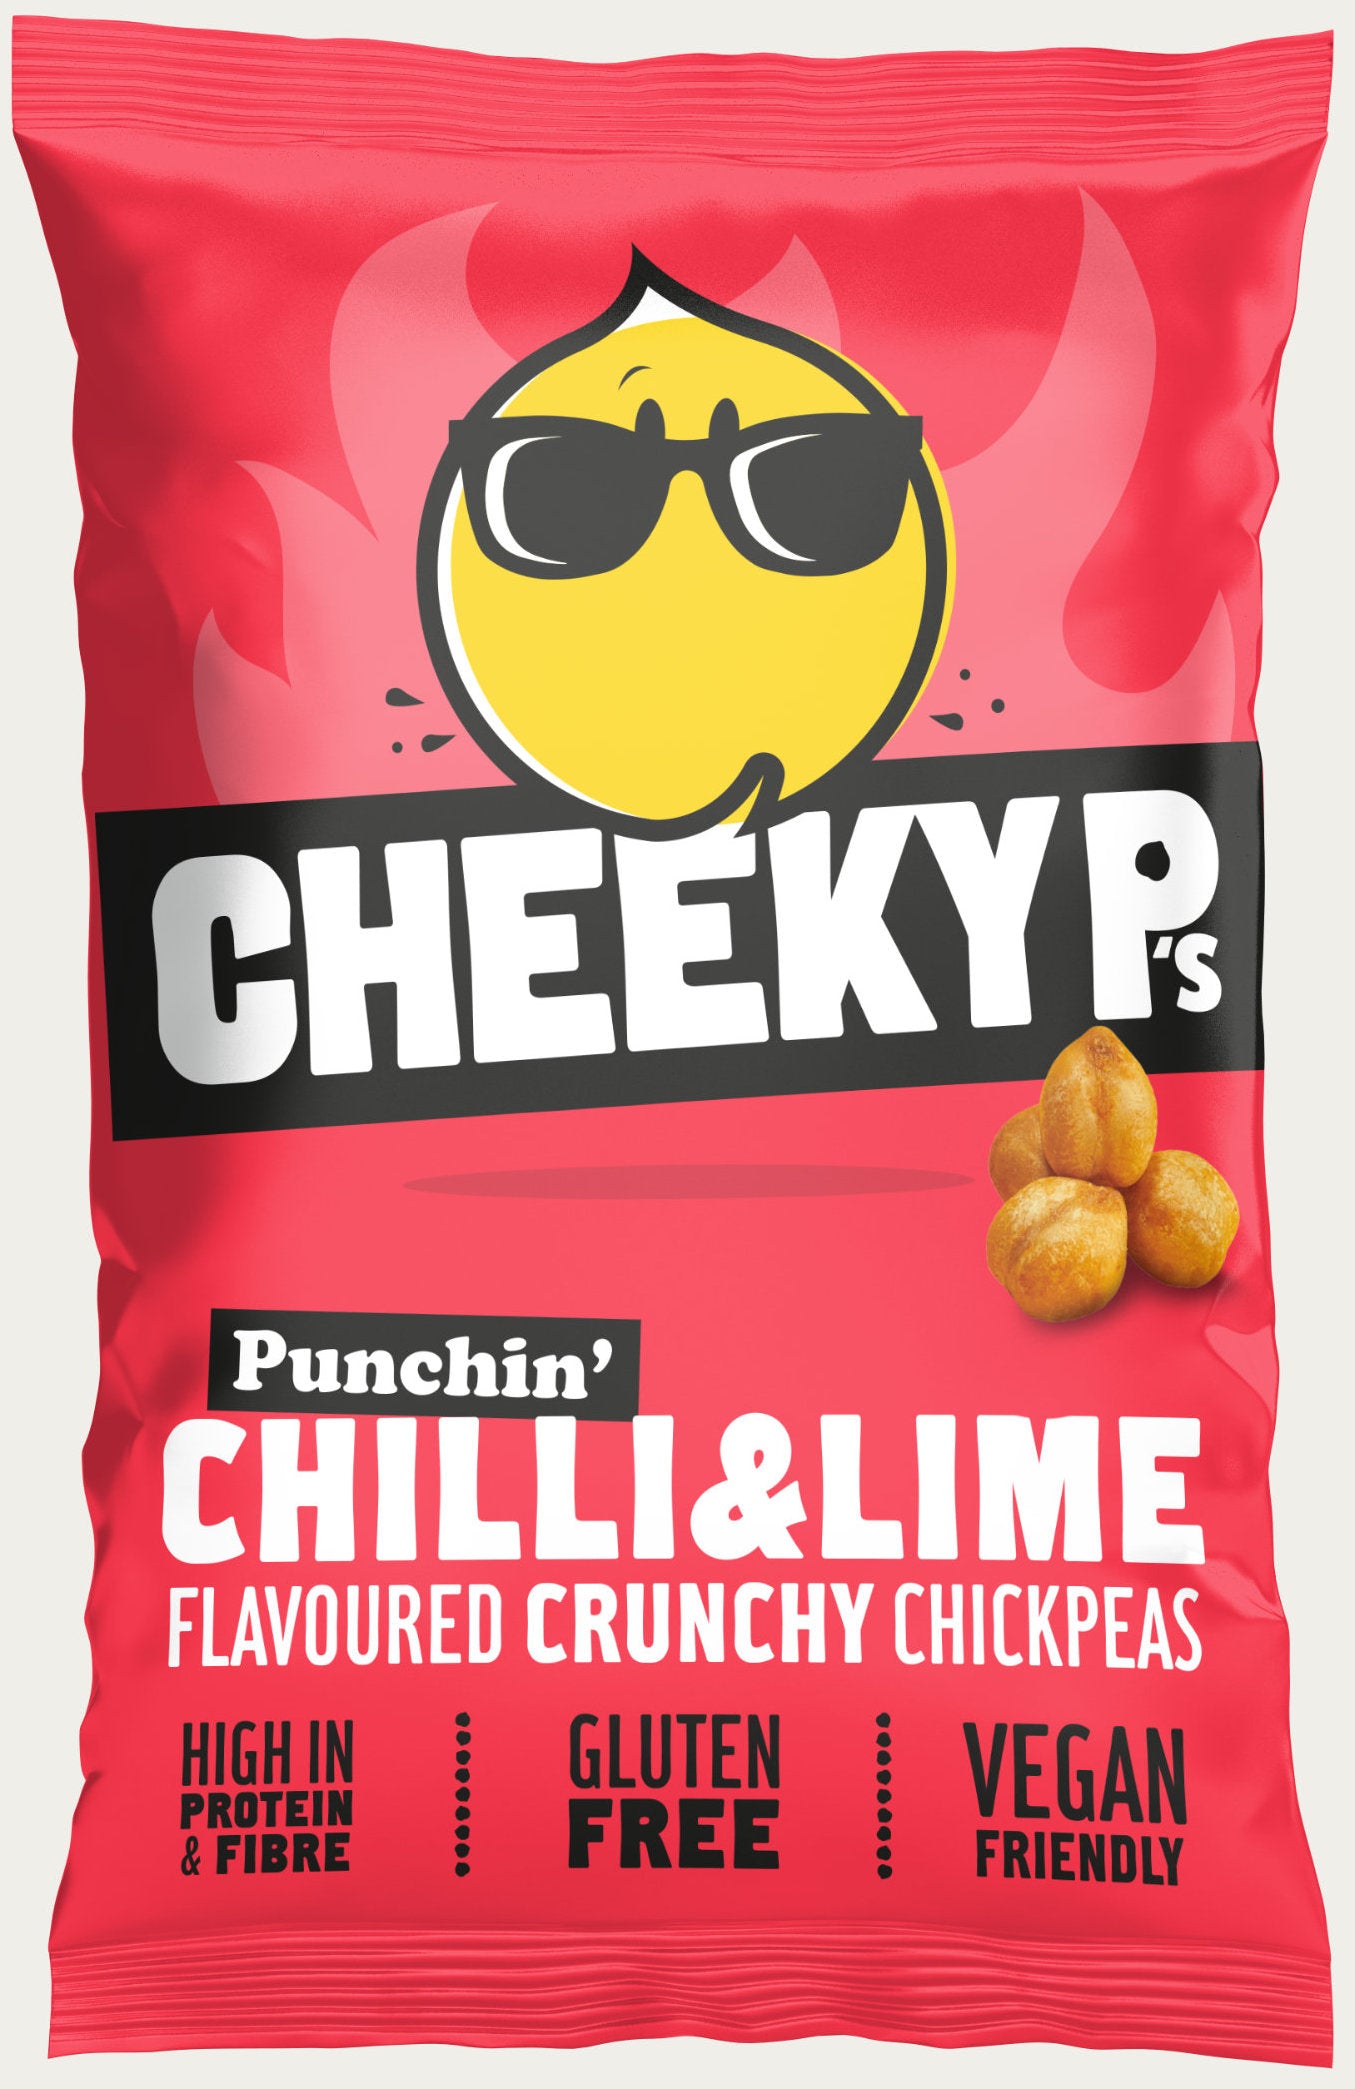 Cheeky P’s Chilli & Lime